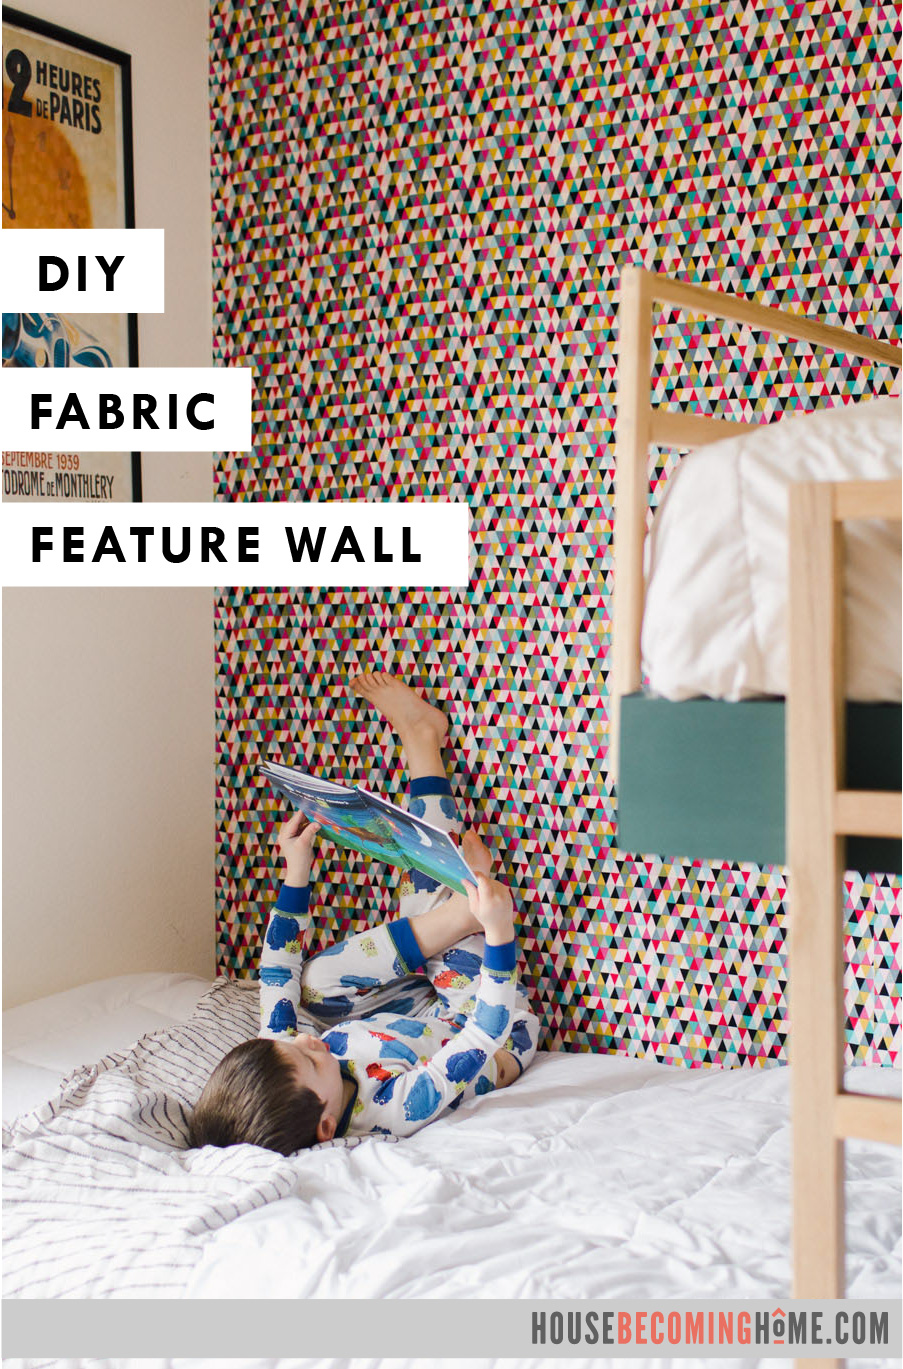 How to Cover Walls with Fabric